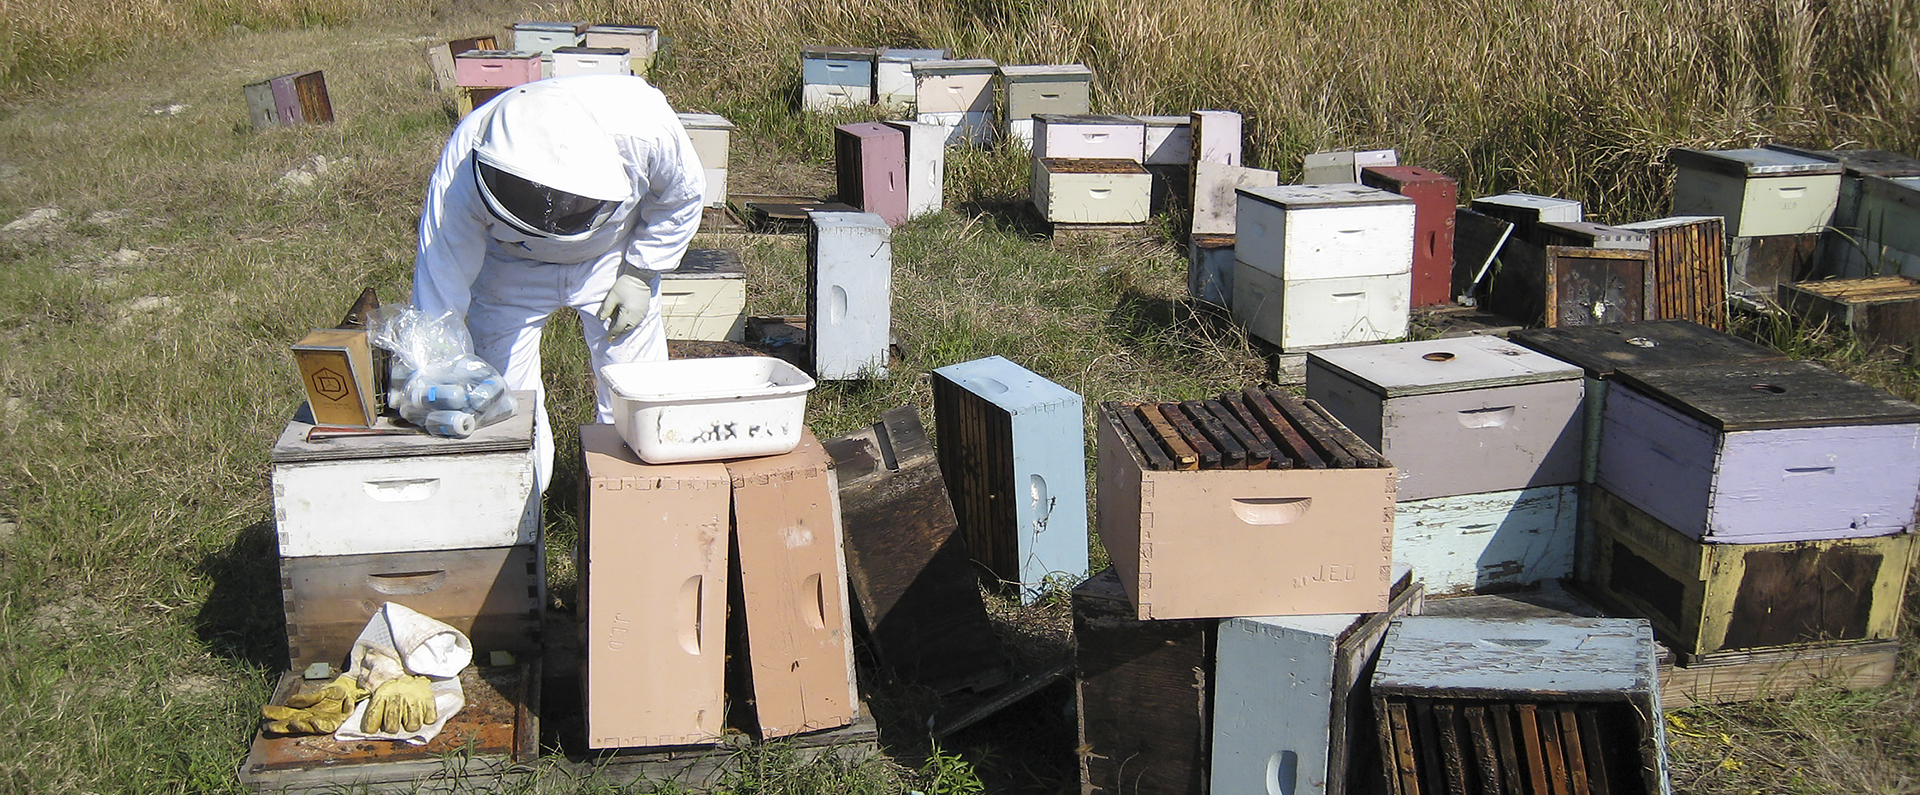 A scientist examining bee boxes